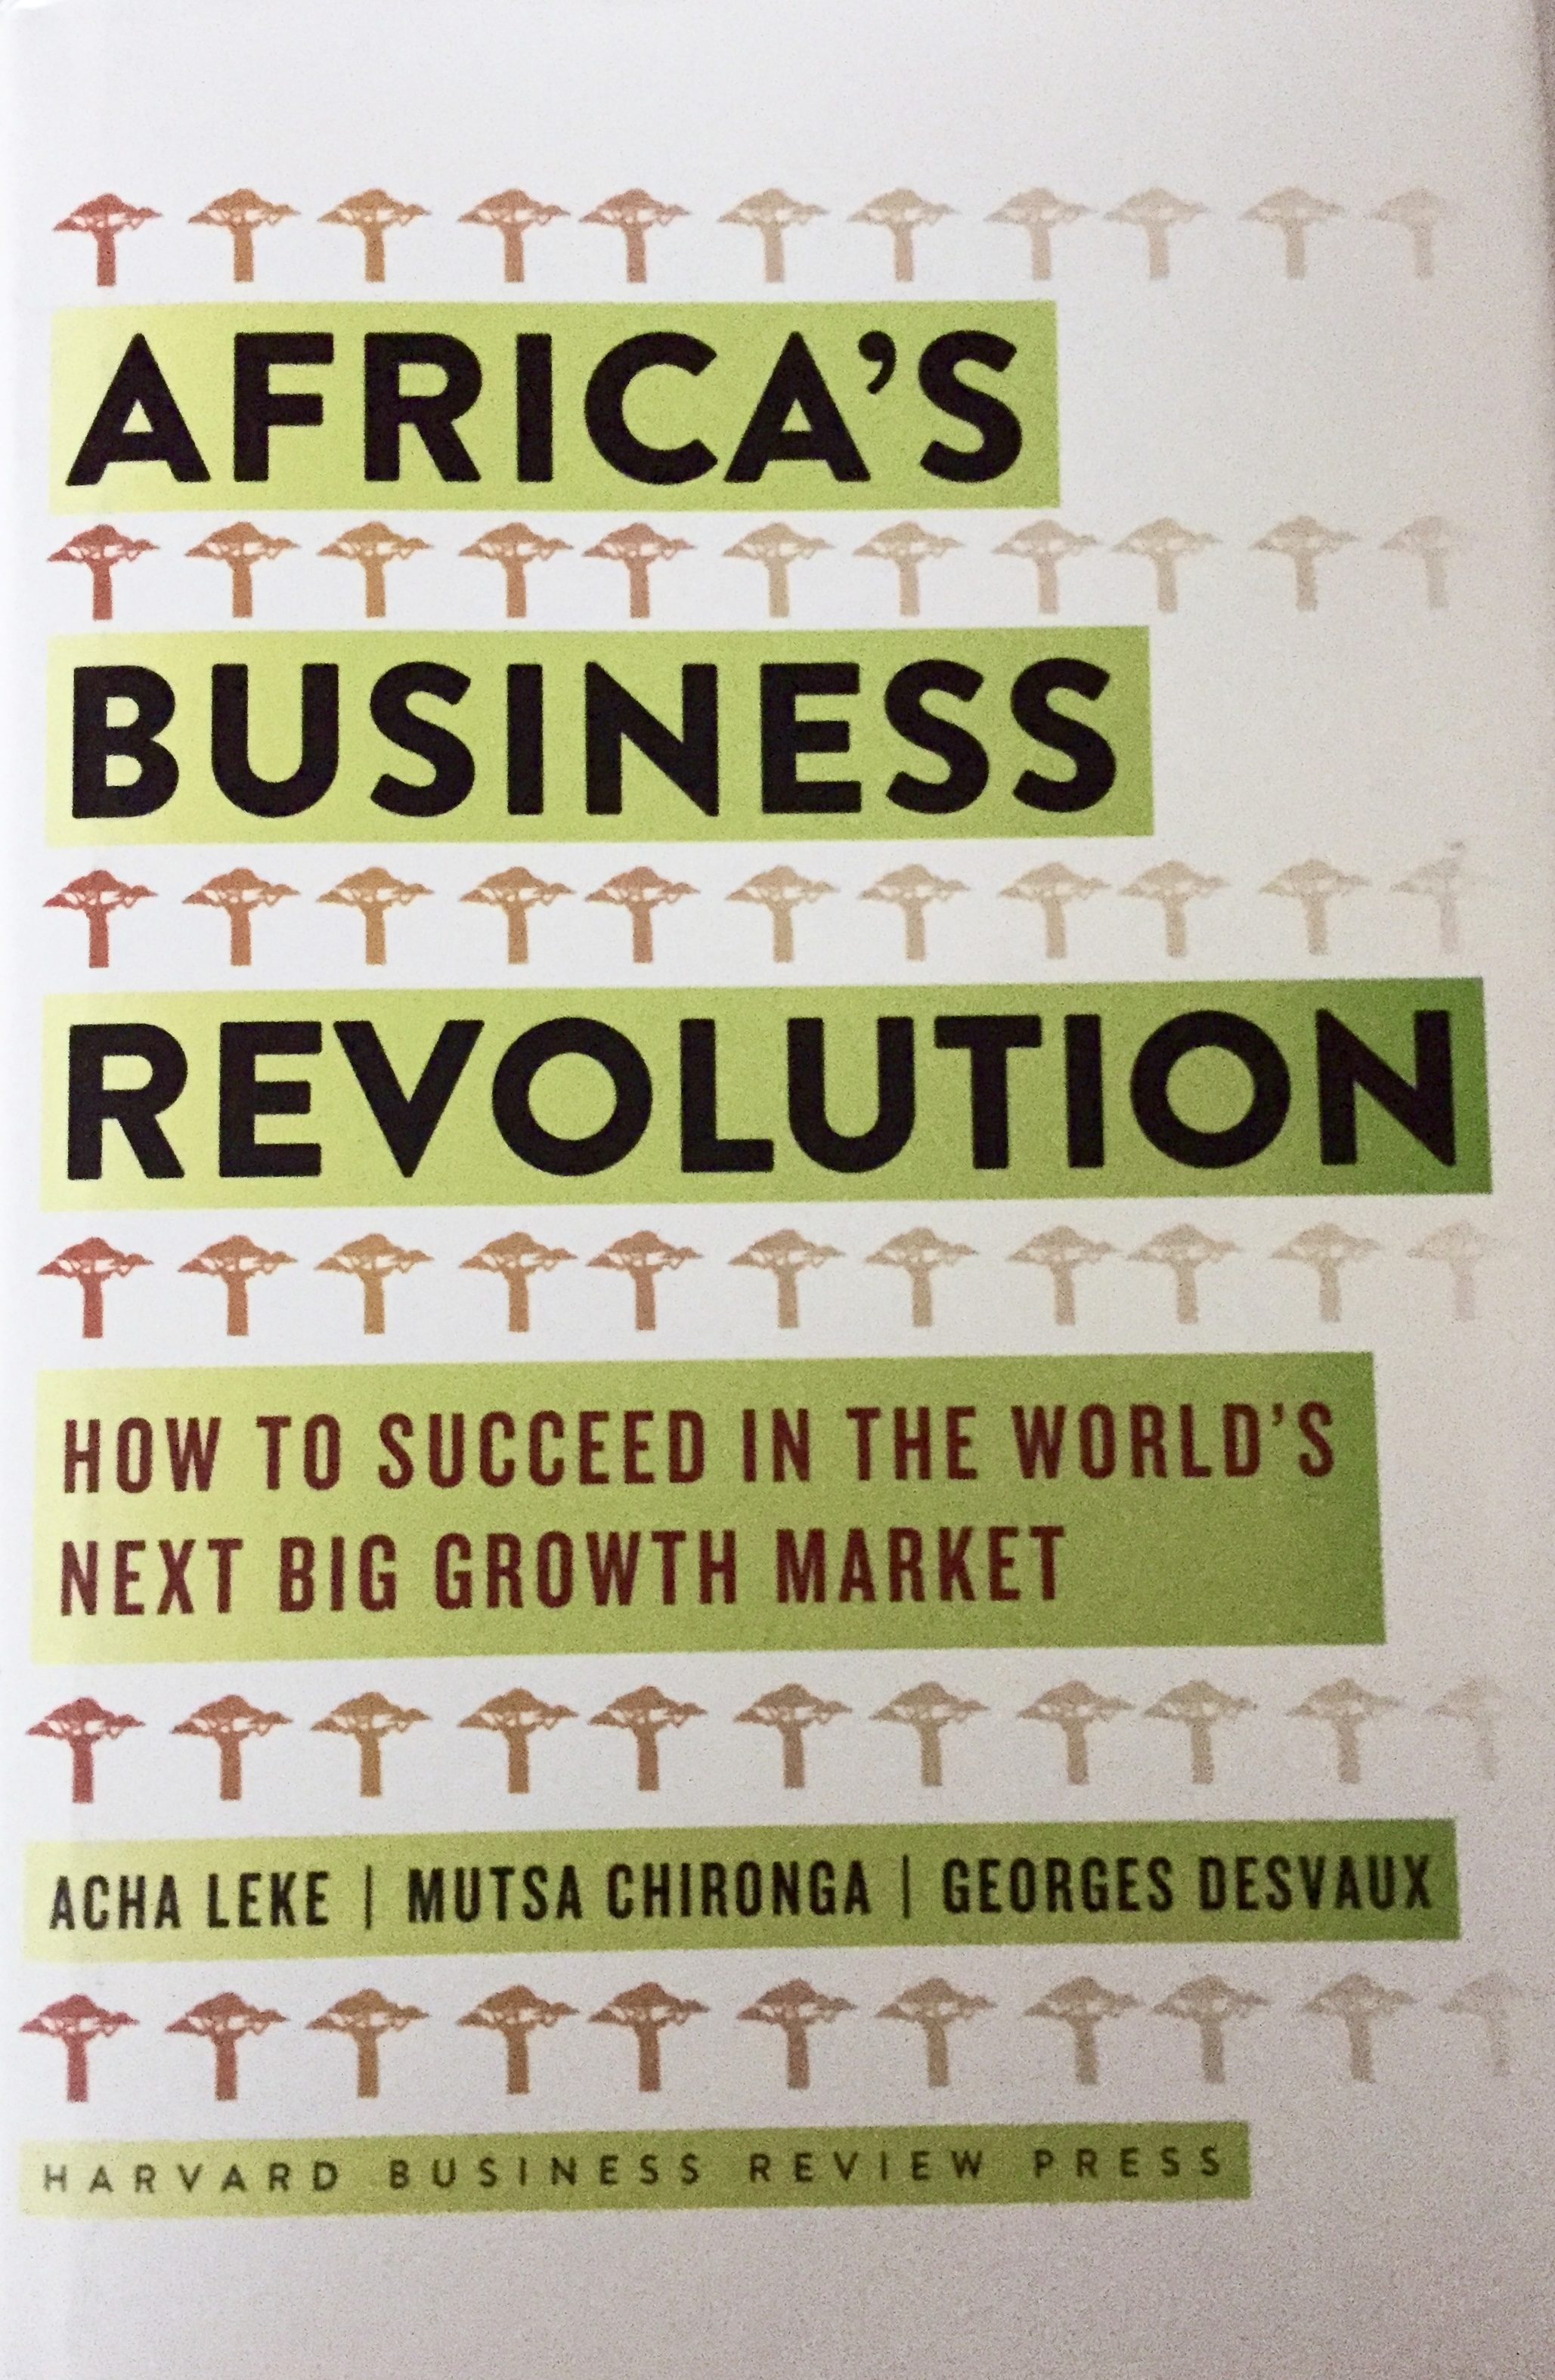 book on African business